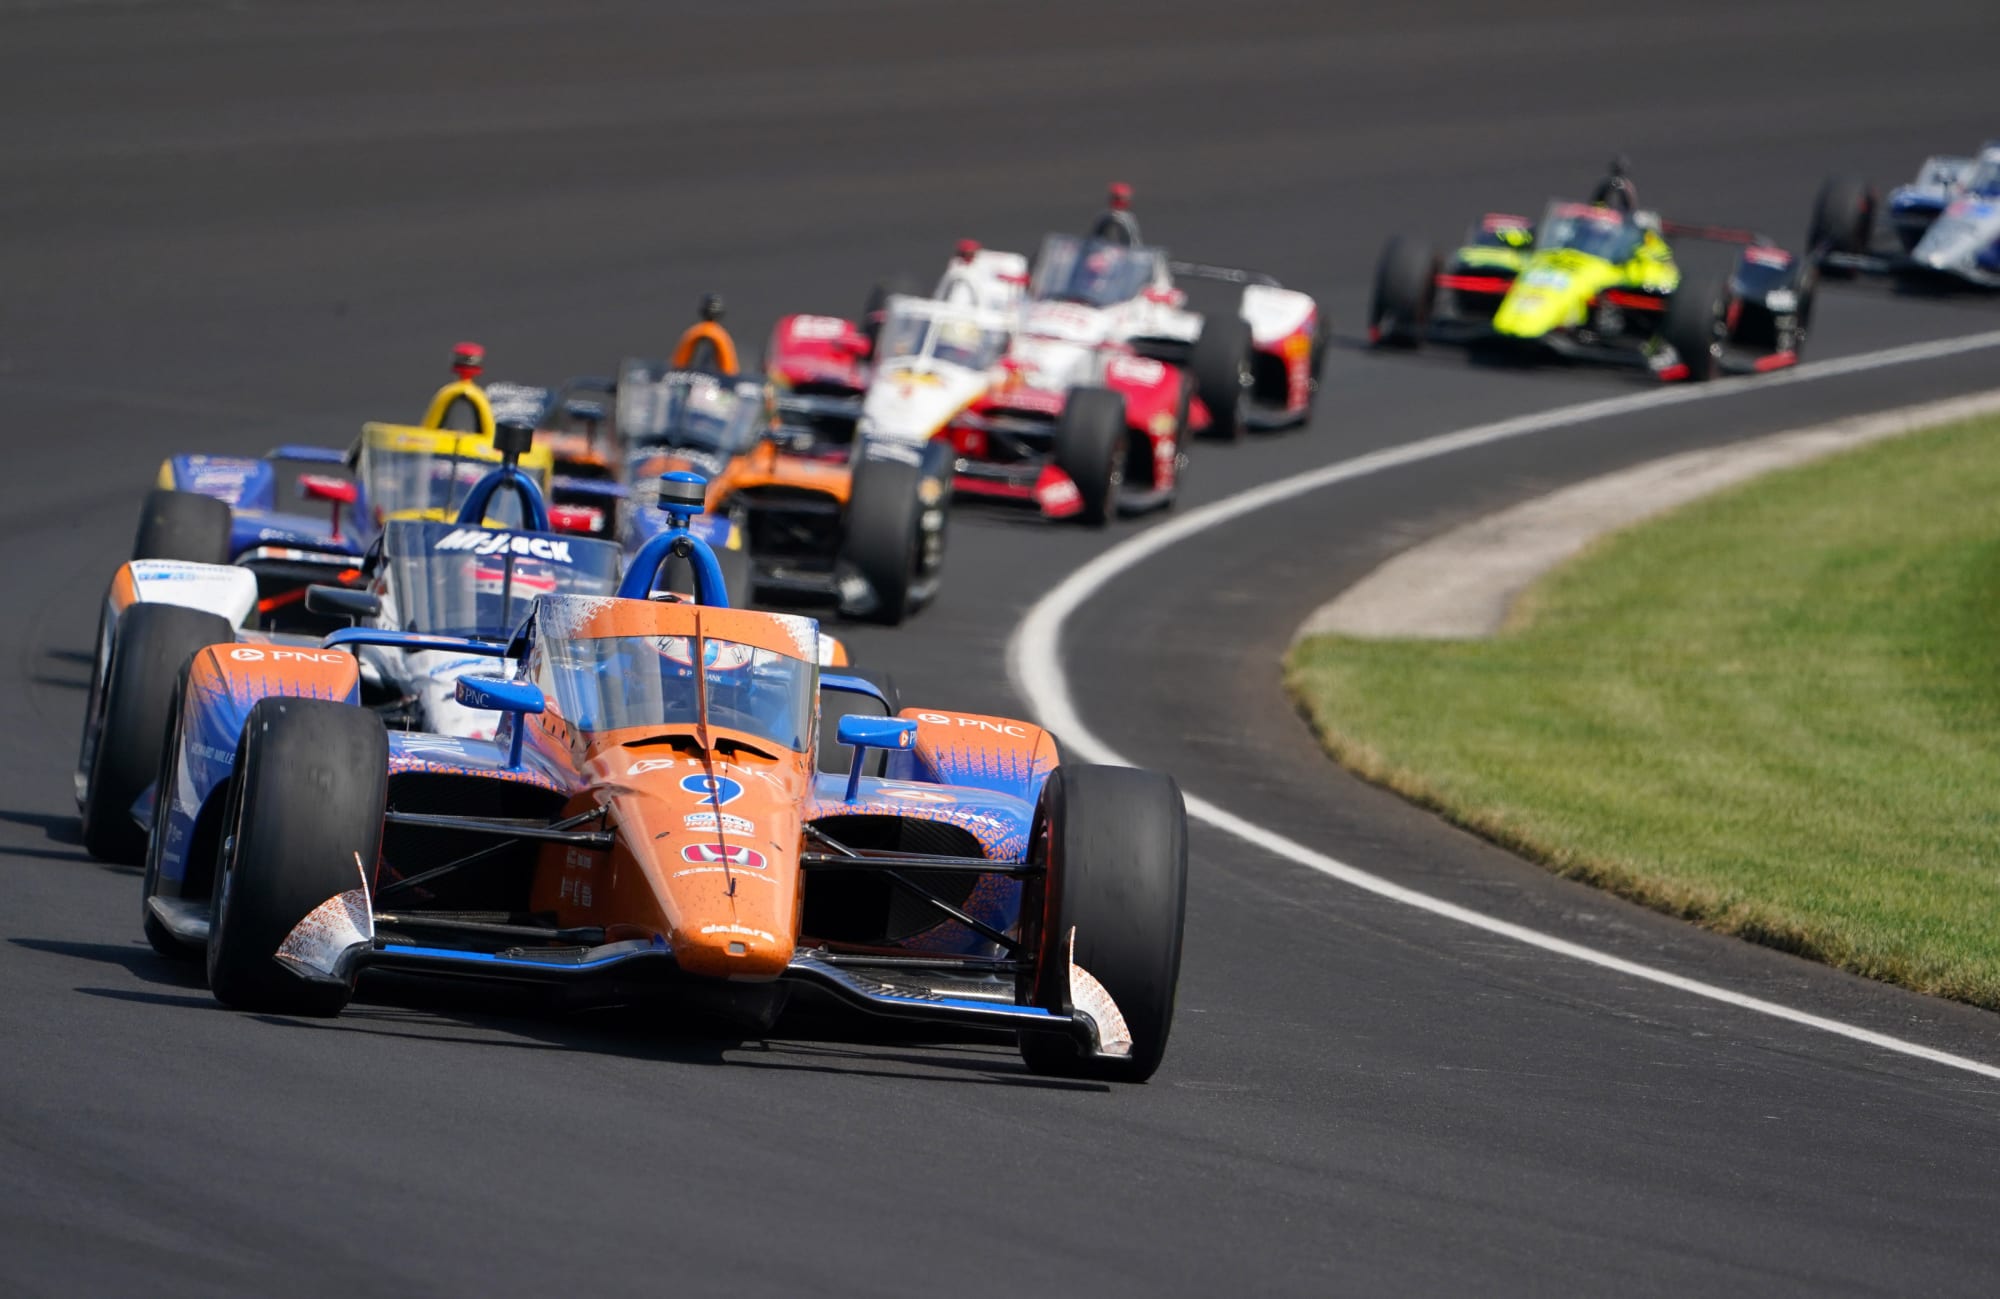 2021 Indy 500 Winner Payout